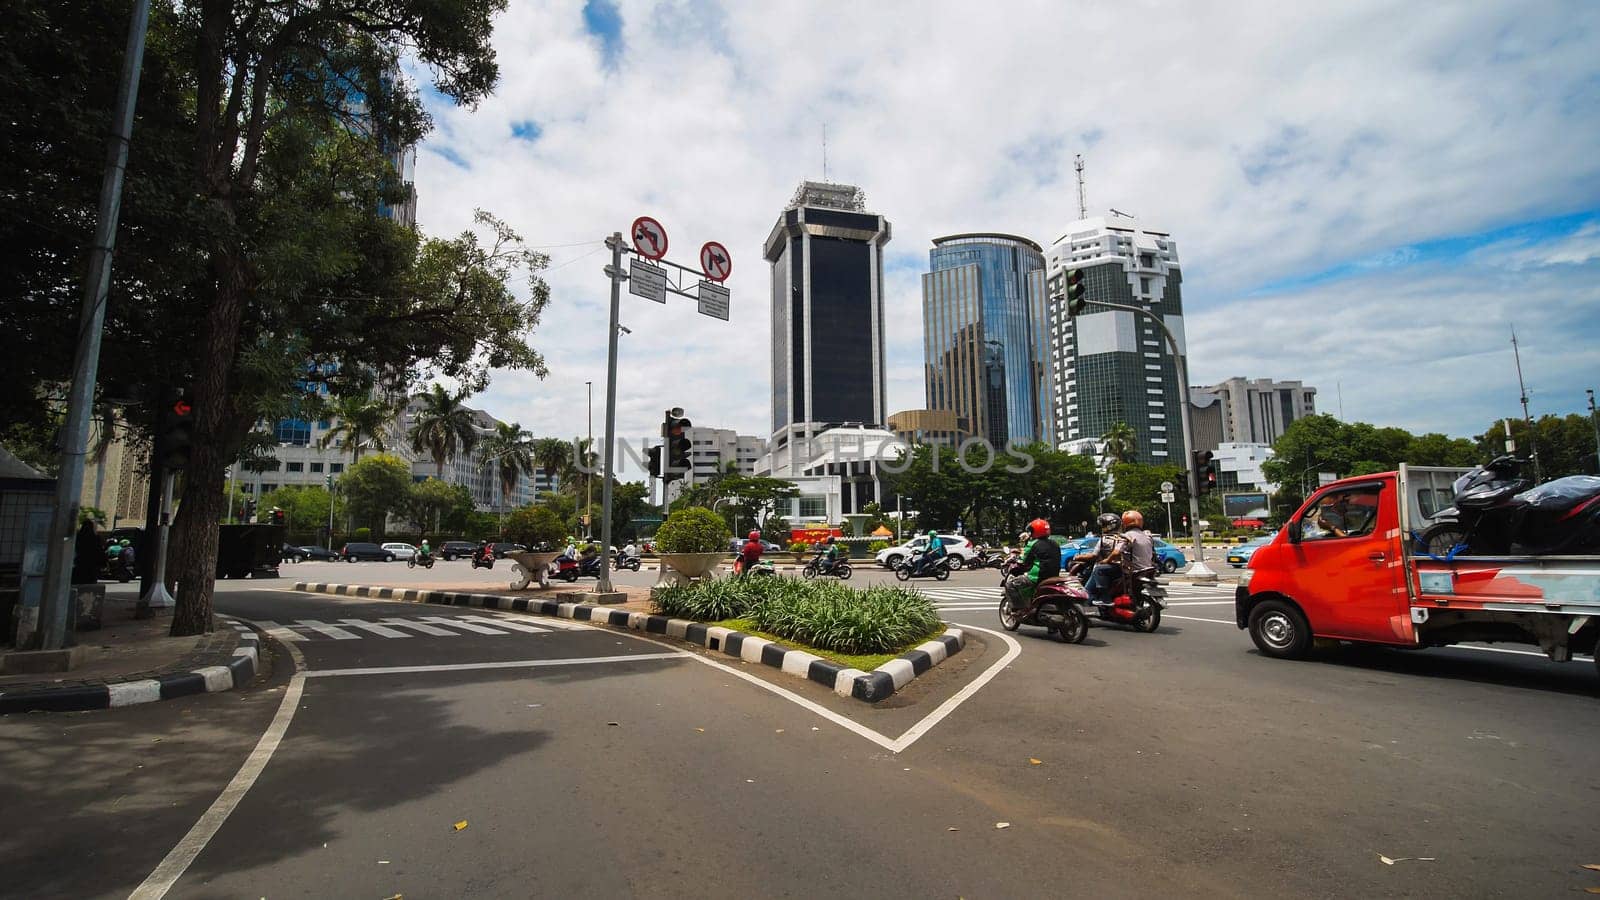 Jakarta's roads and streets with cars during the daytime